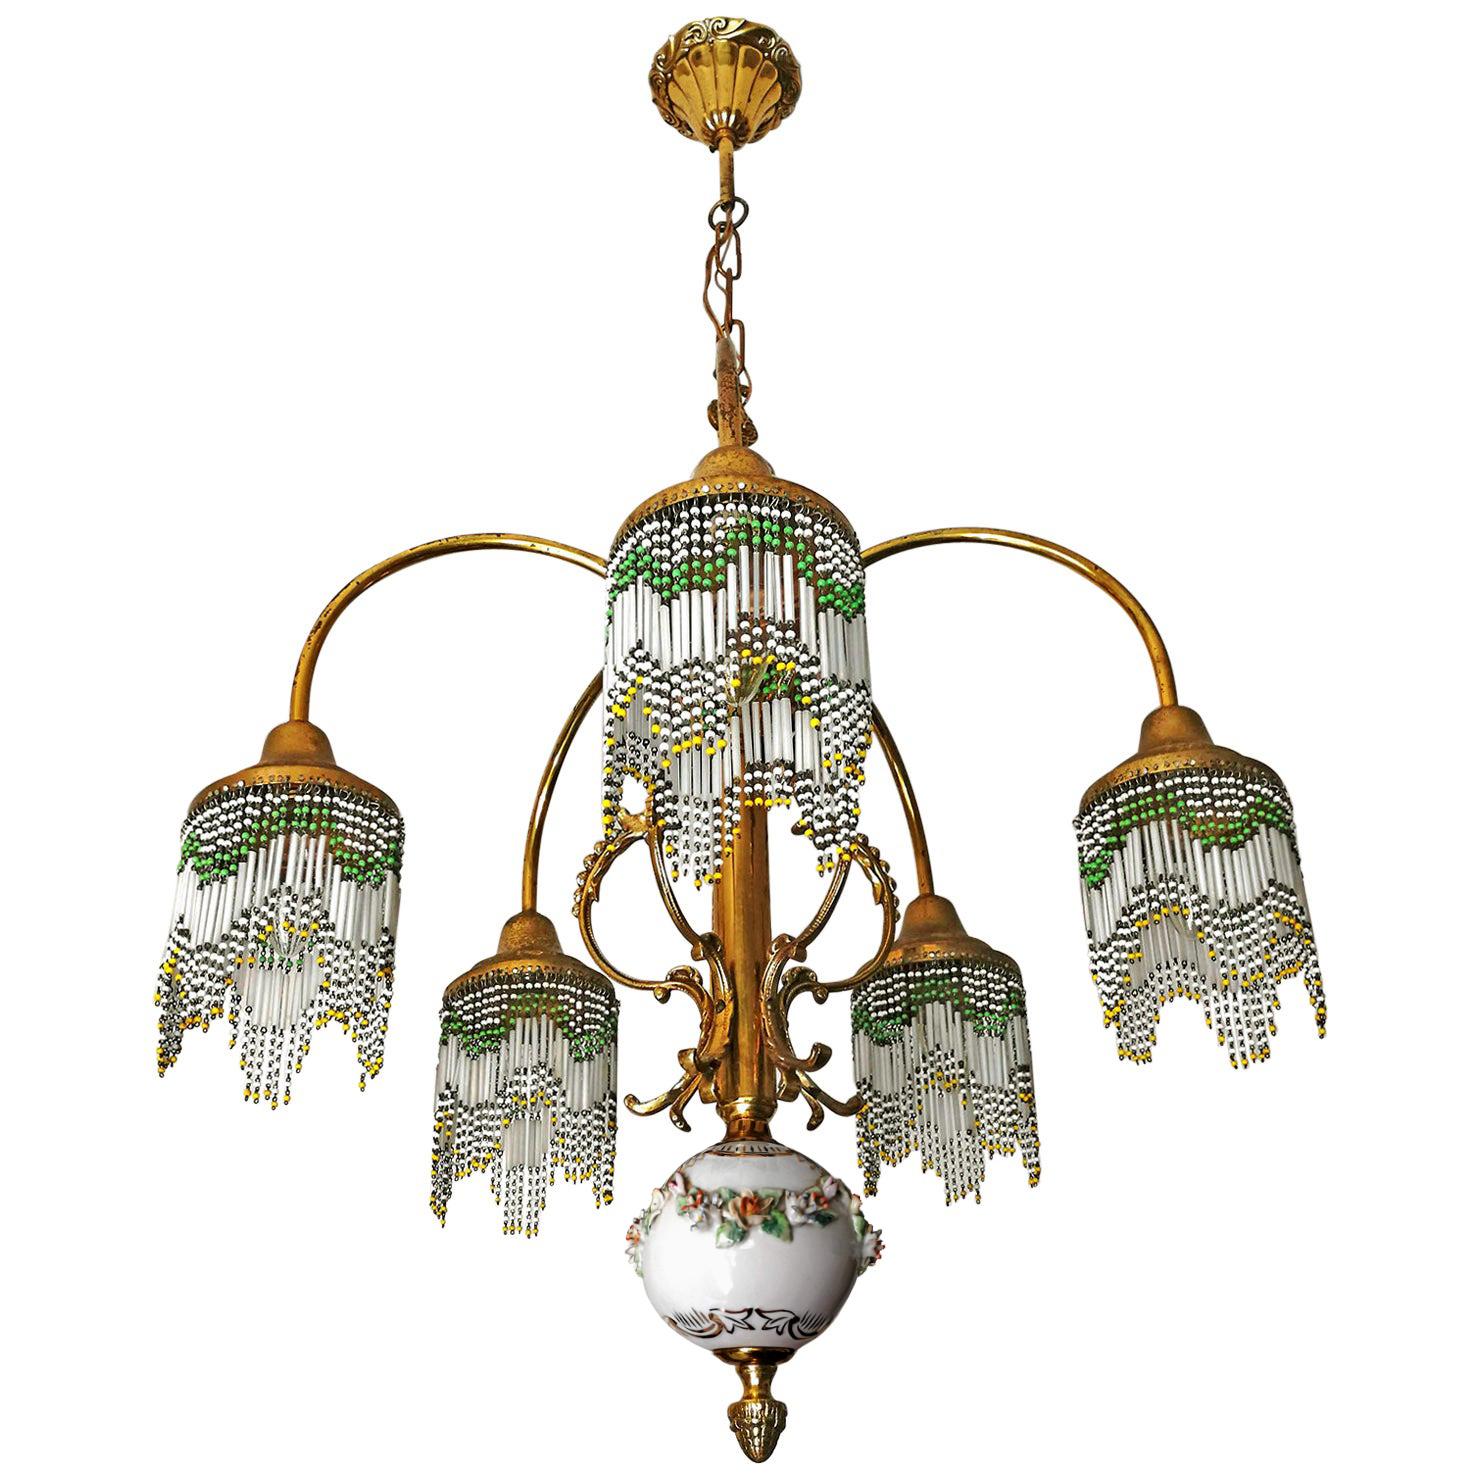 Beautiful French Art Nouveau Art Deco gilded brass, bronze and polychrome beaded fringe lamp shades.
Measures:
Diameter 23.6 in /60 cm
Height 31.5 in (7.8b in/chain) / 86 cm (20 cm/chain)
Weight: 6 Kg / 13 lb
5-light bulbs E-14 / good working